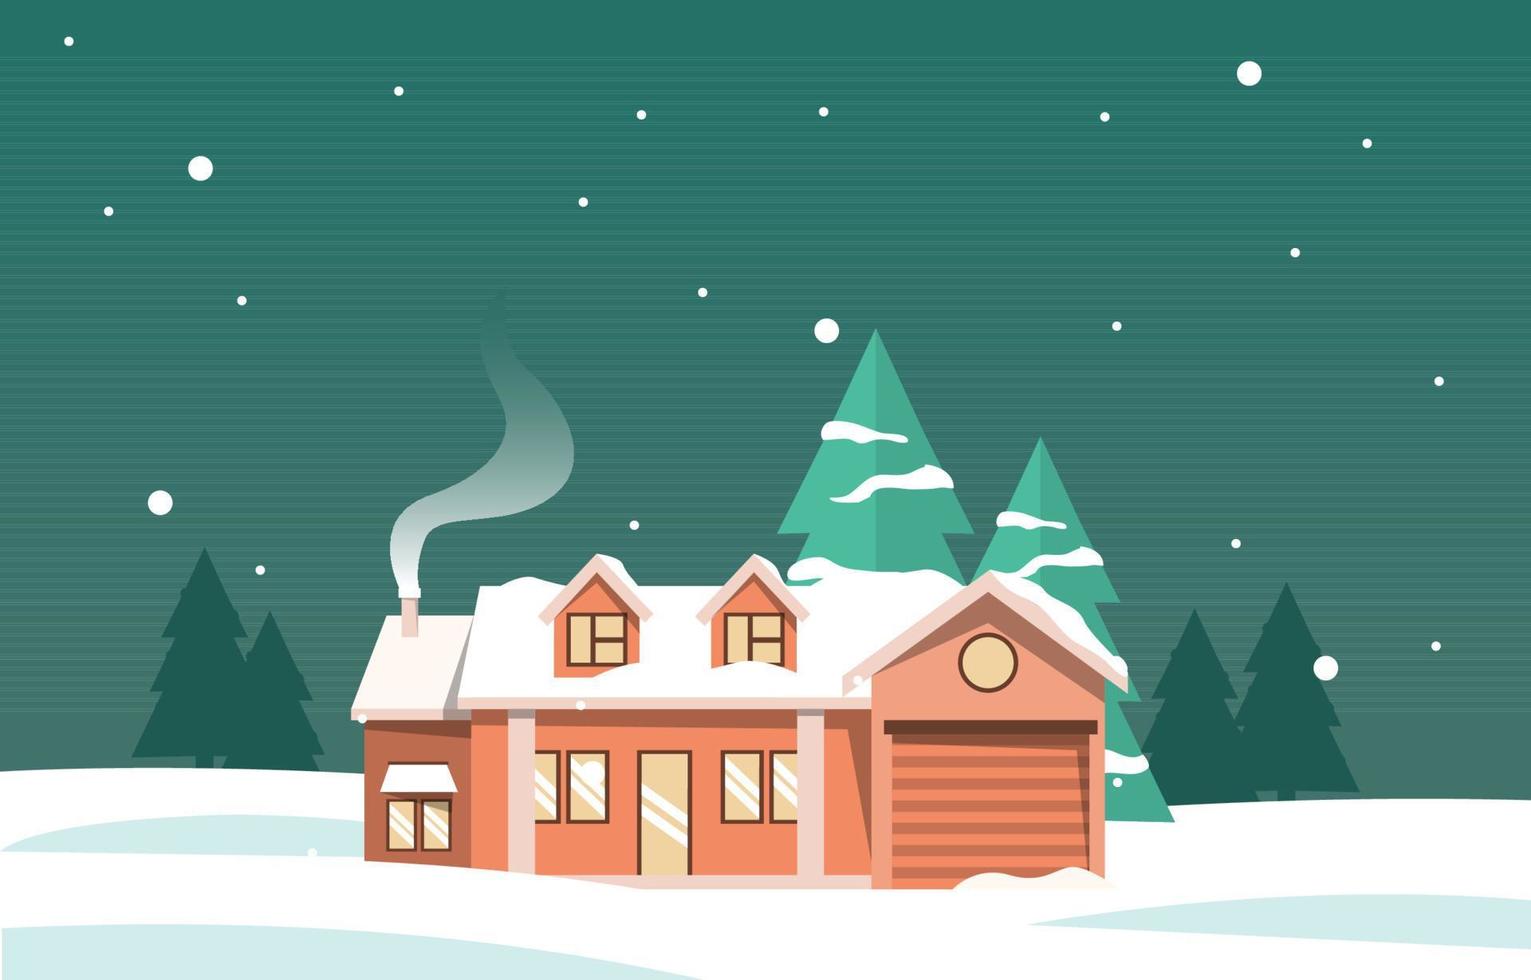 House Home in Night Snow Fall Winter Illustration vector